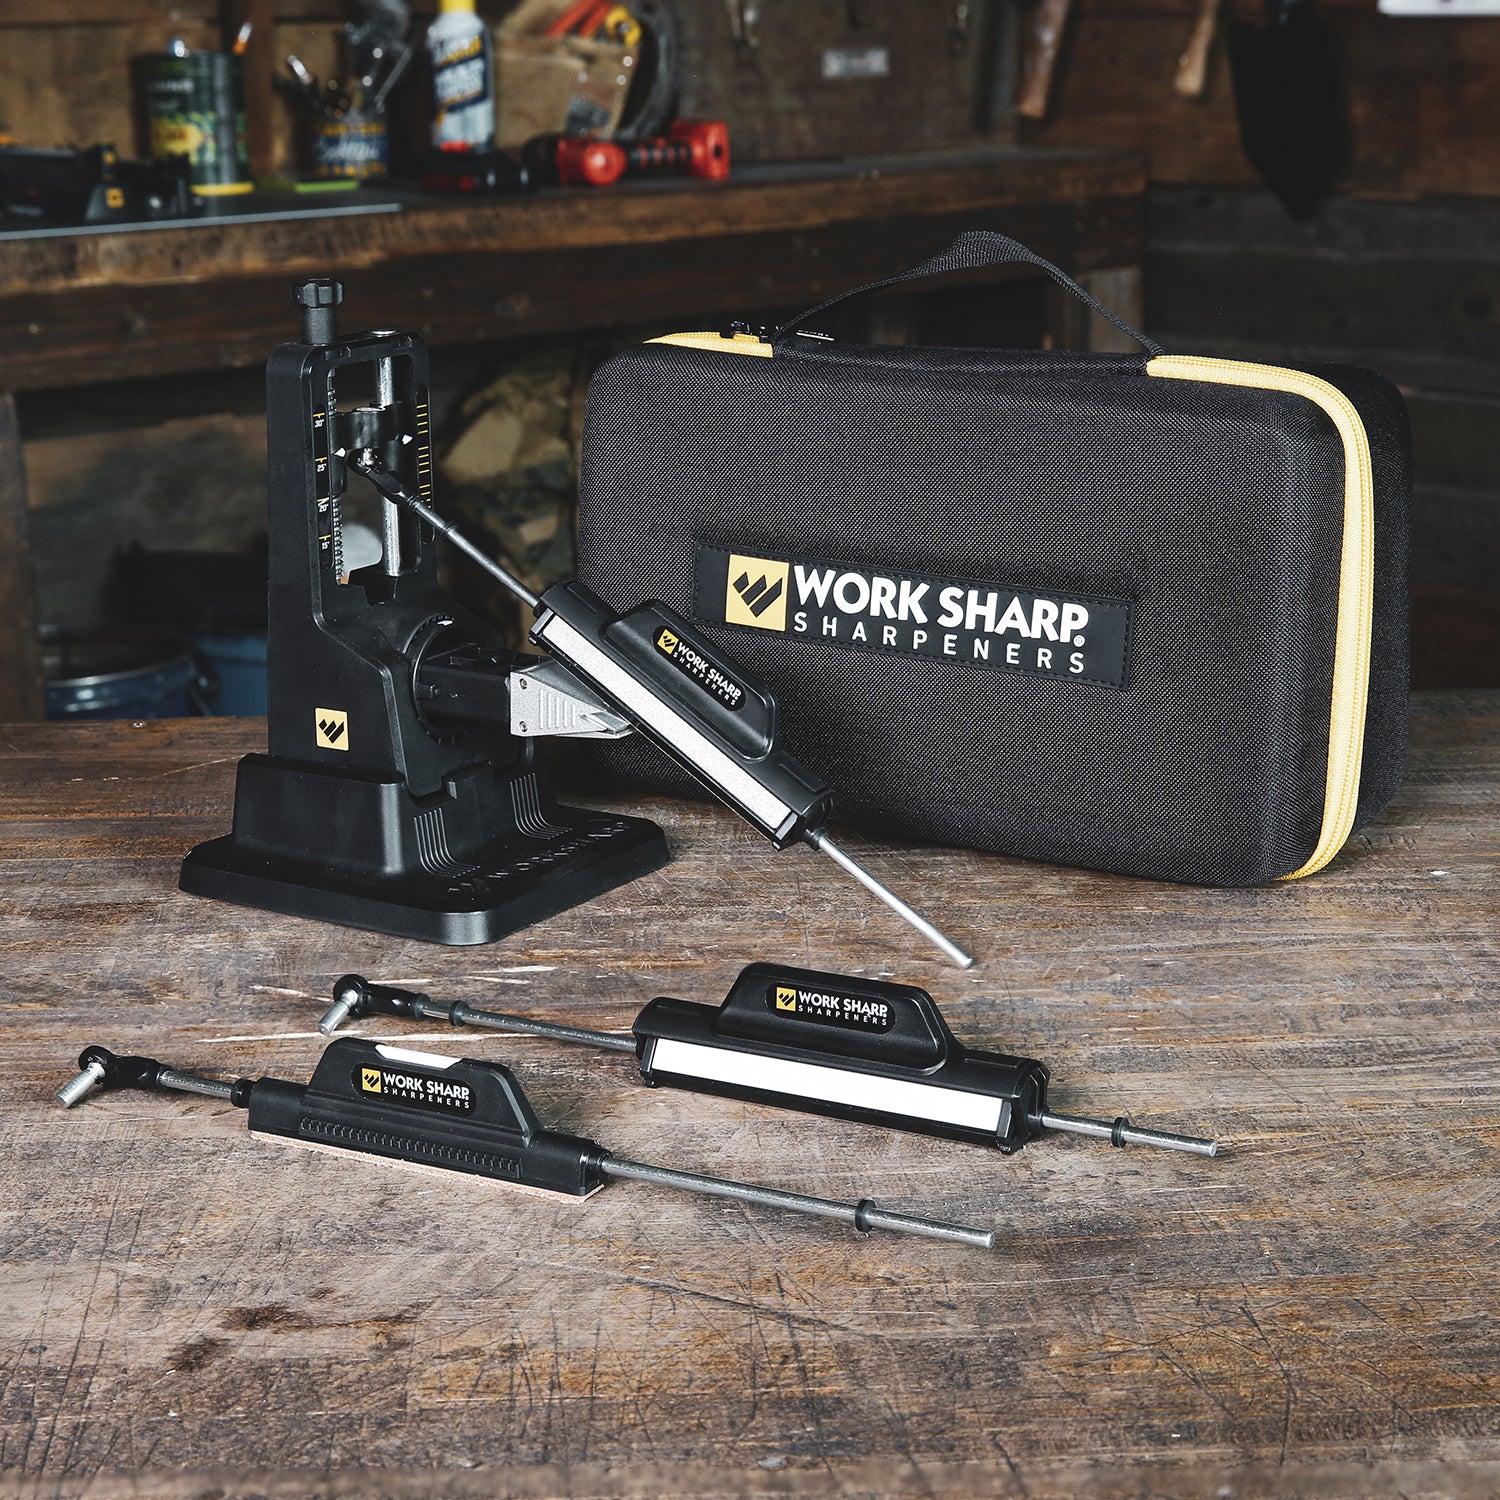 High end manual knife sharpening precision adjust with elite upgrade kit. Easy to use rod and clamp knife sharpening